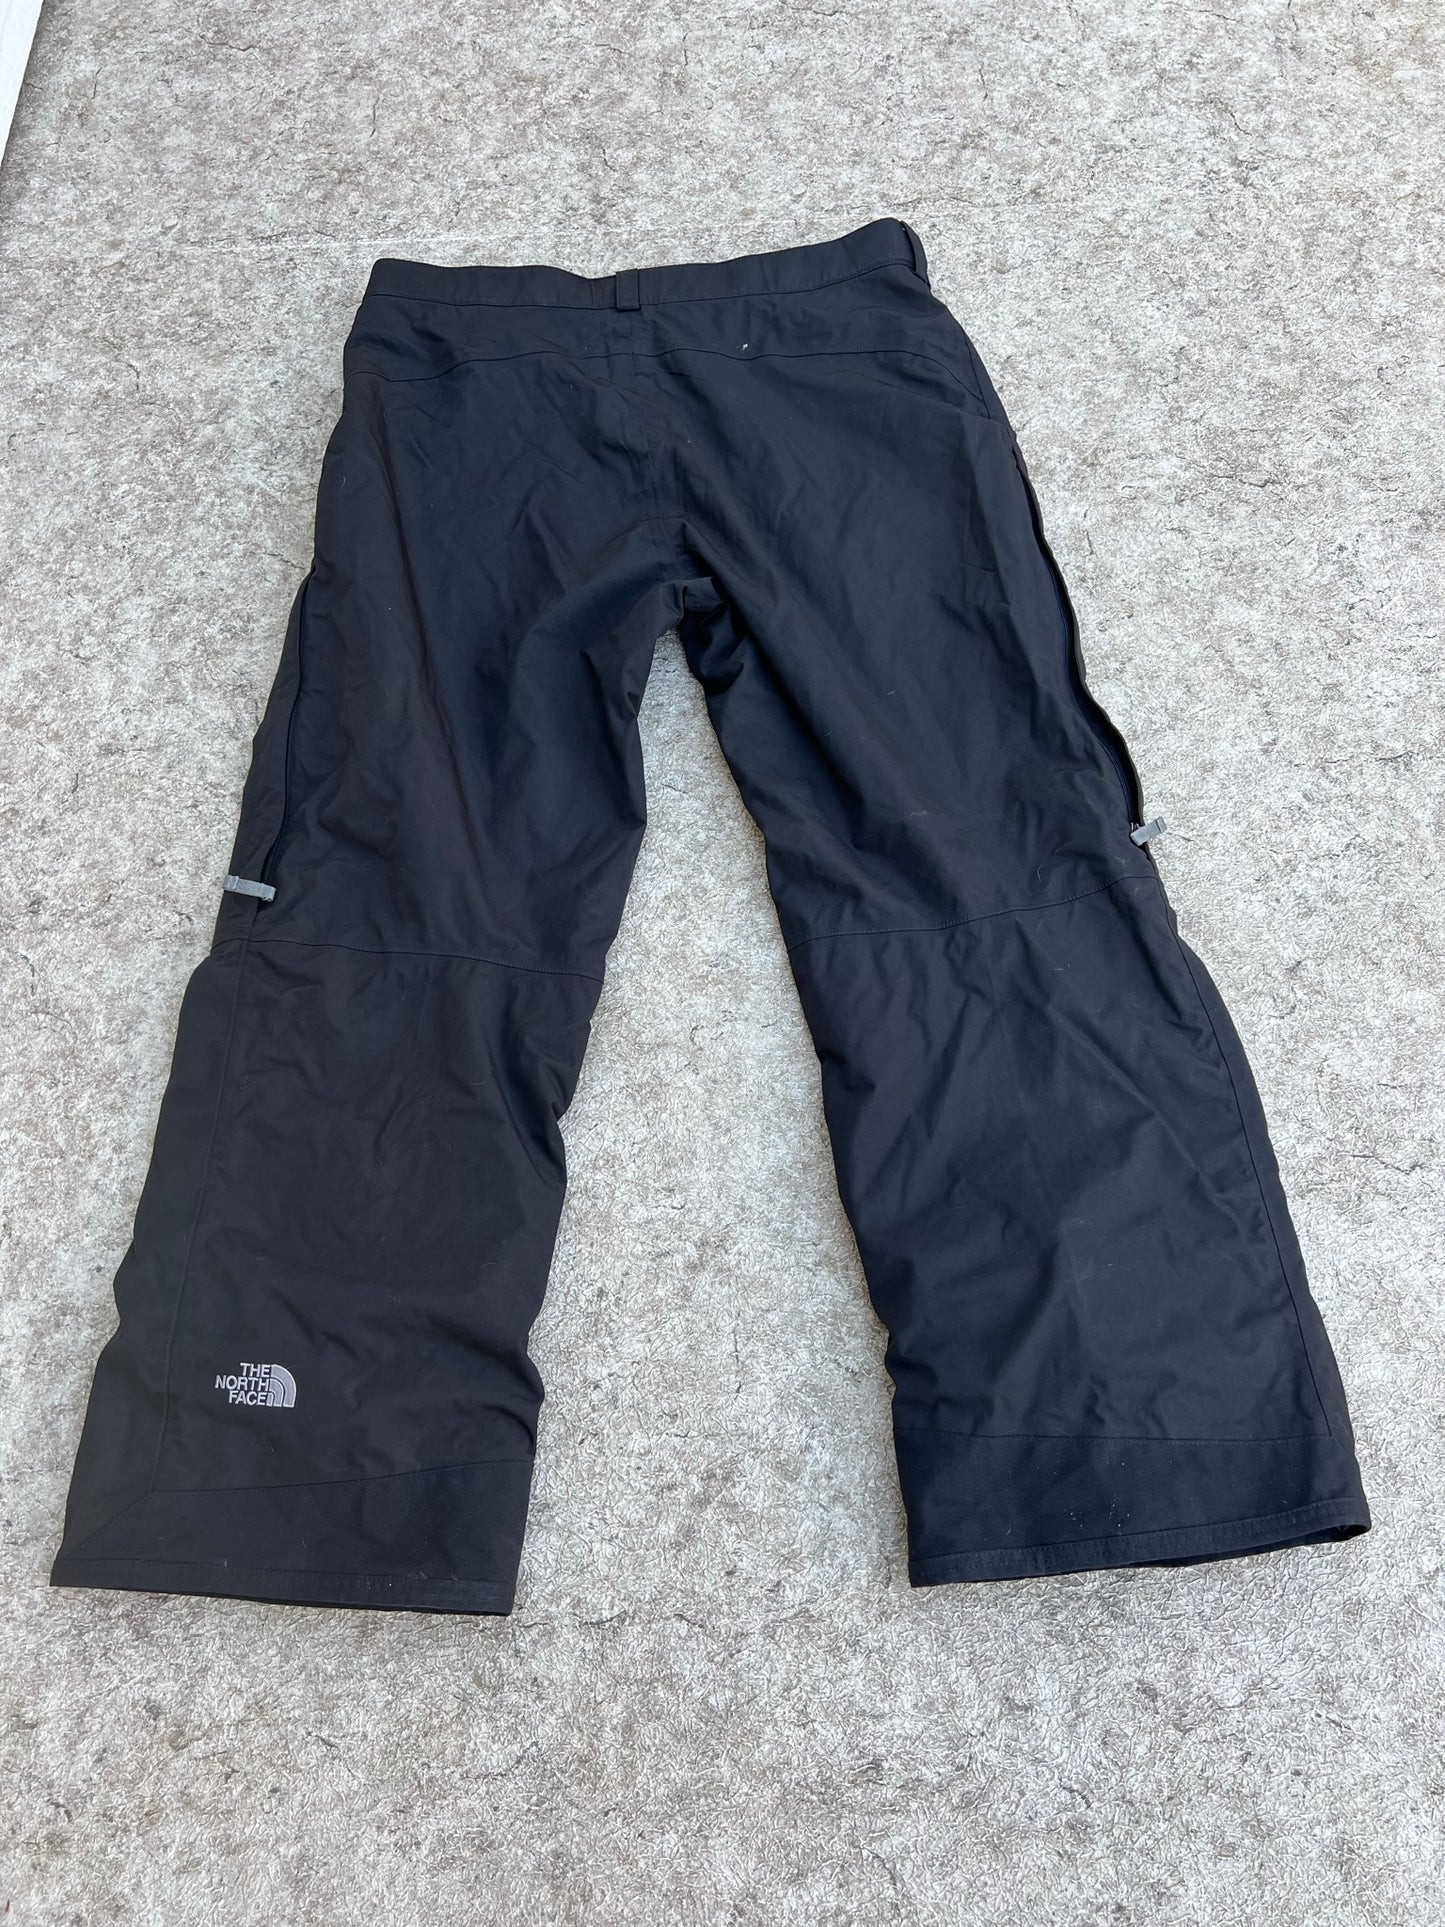 Snow Pants Men's Size X Large The North Face  Black Waterproof New Demo Model